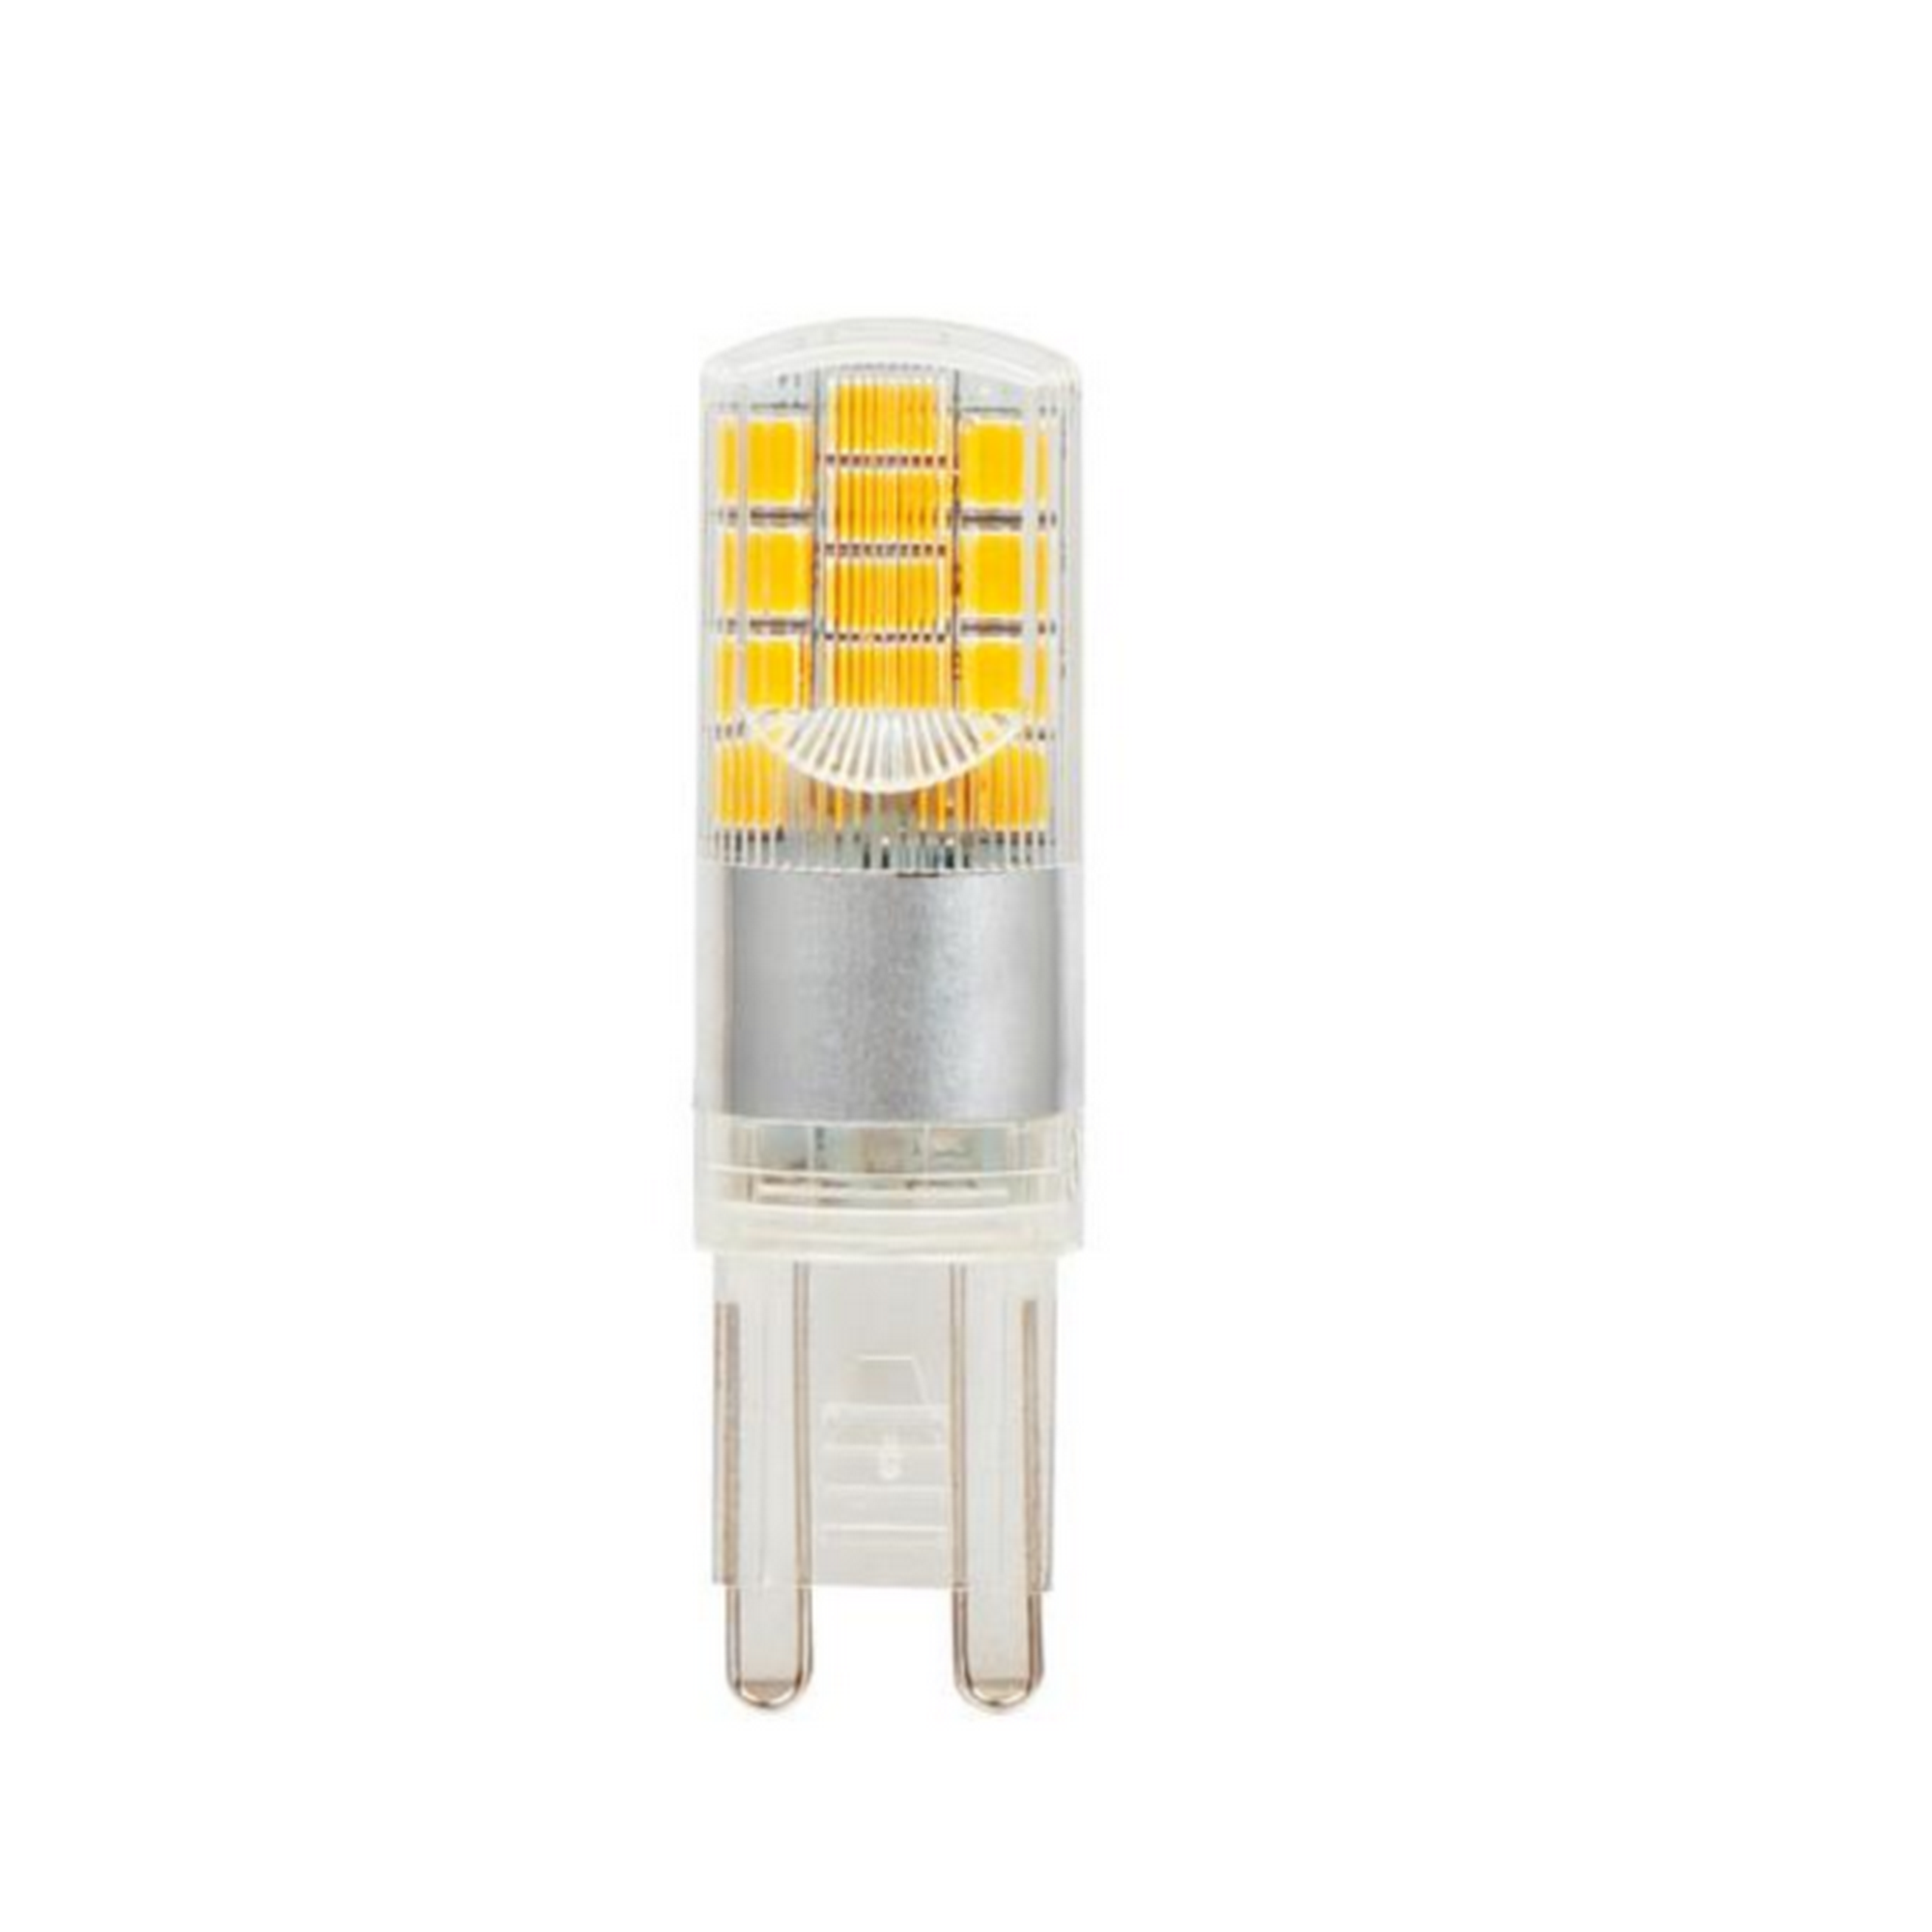 LED-Stift G9 2,6 W 320 lm 3er-Pack + product picture